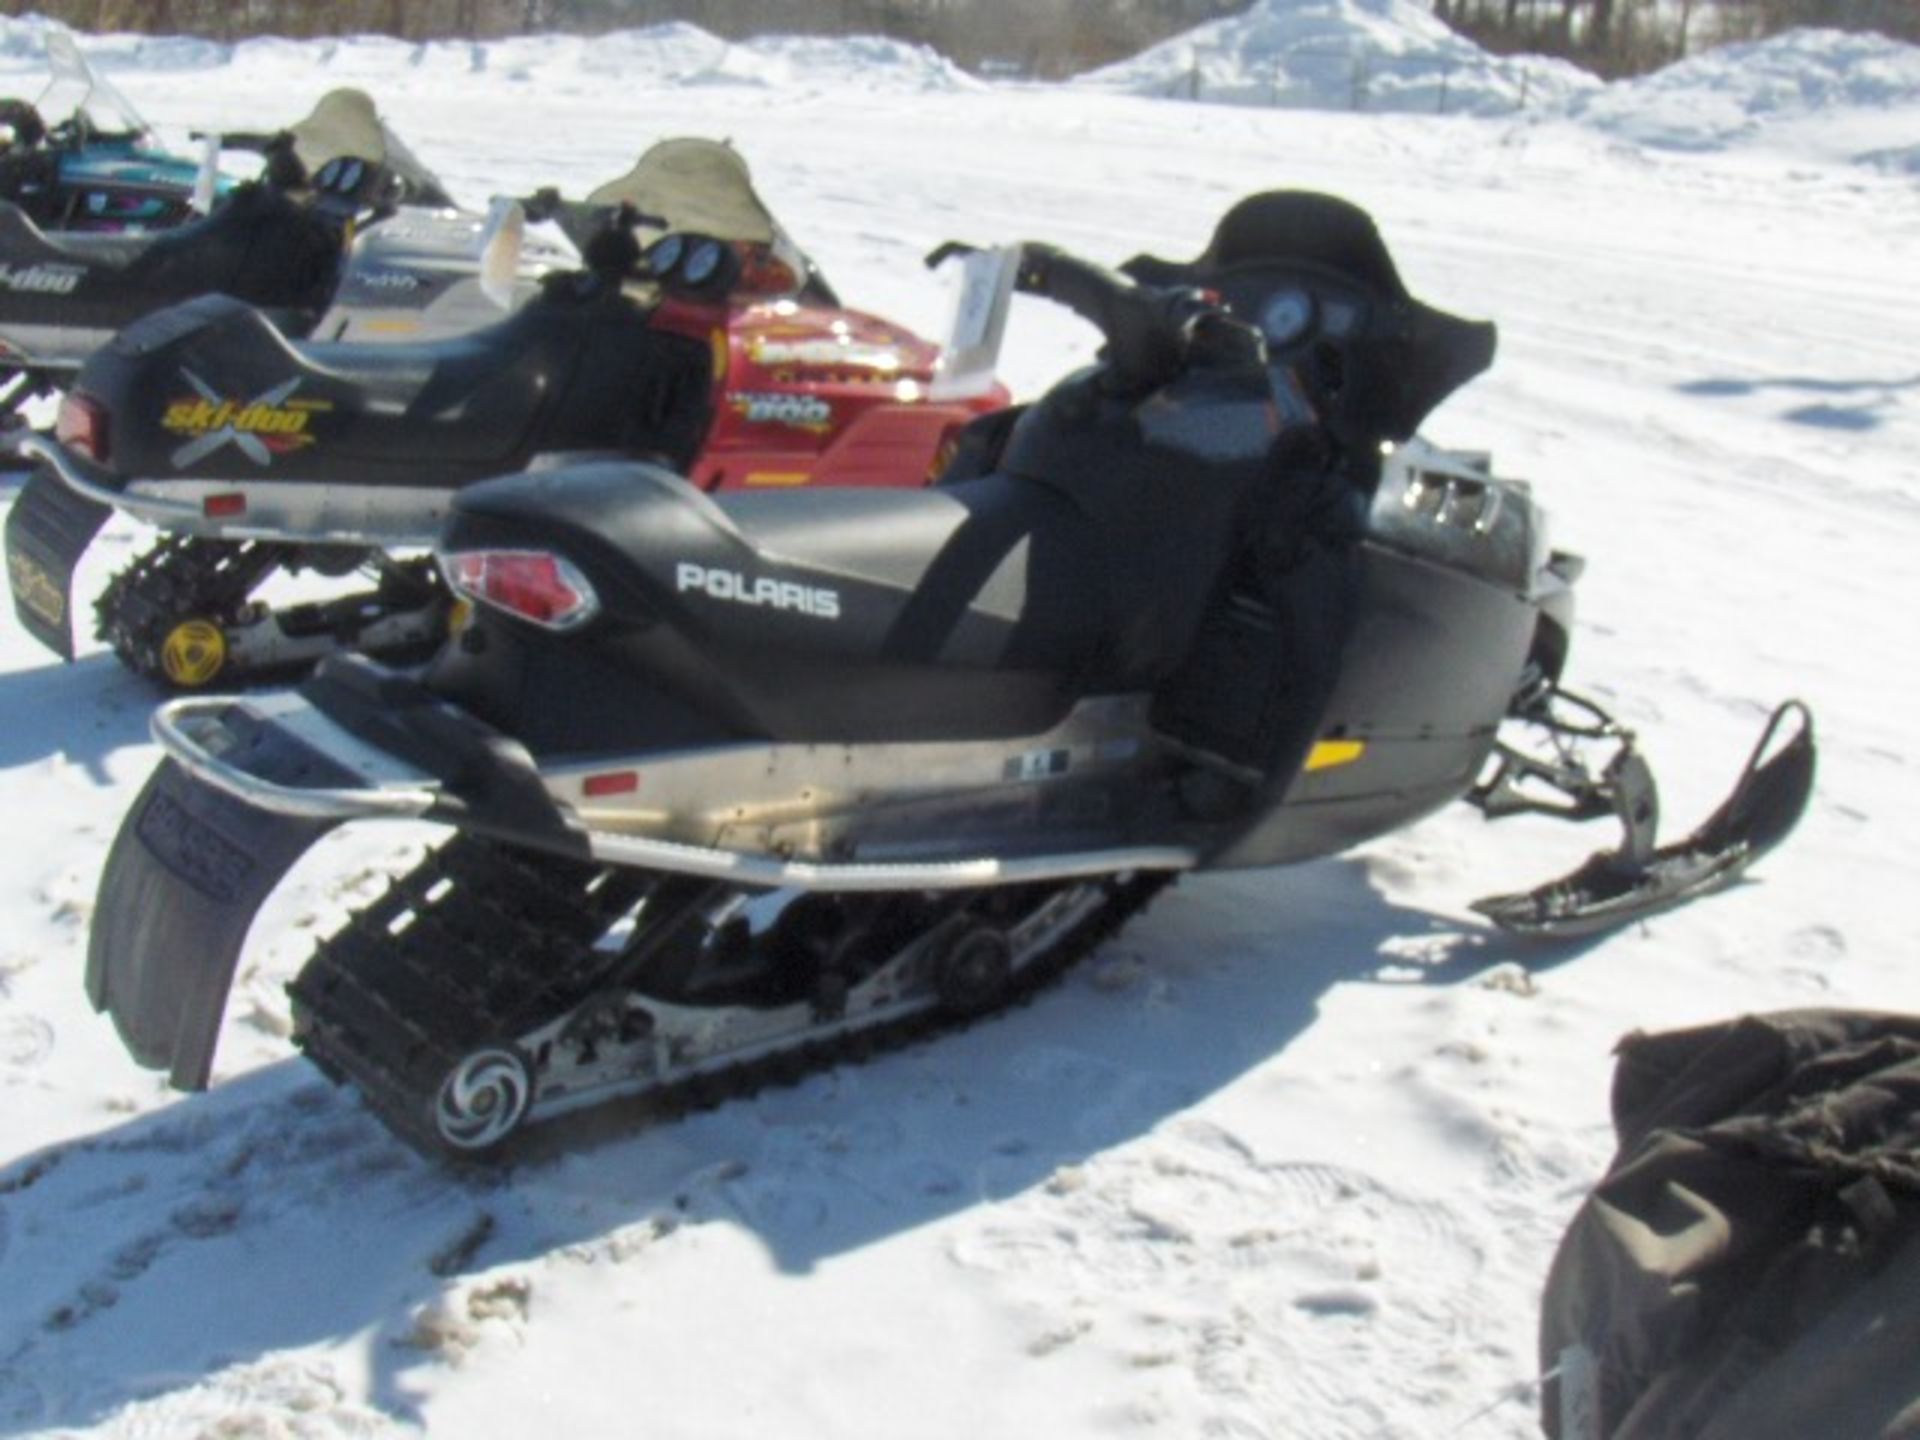 2008 POLARIS 750 SWITCHBACK 4XAMN50A98B299780 snowmobile, owner started at time of check-in, - Image 3 of 4